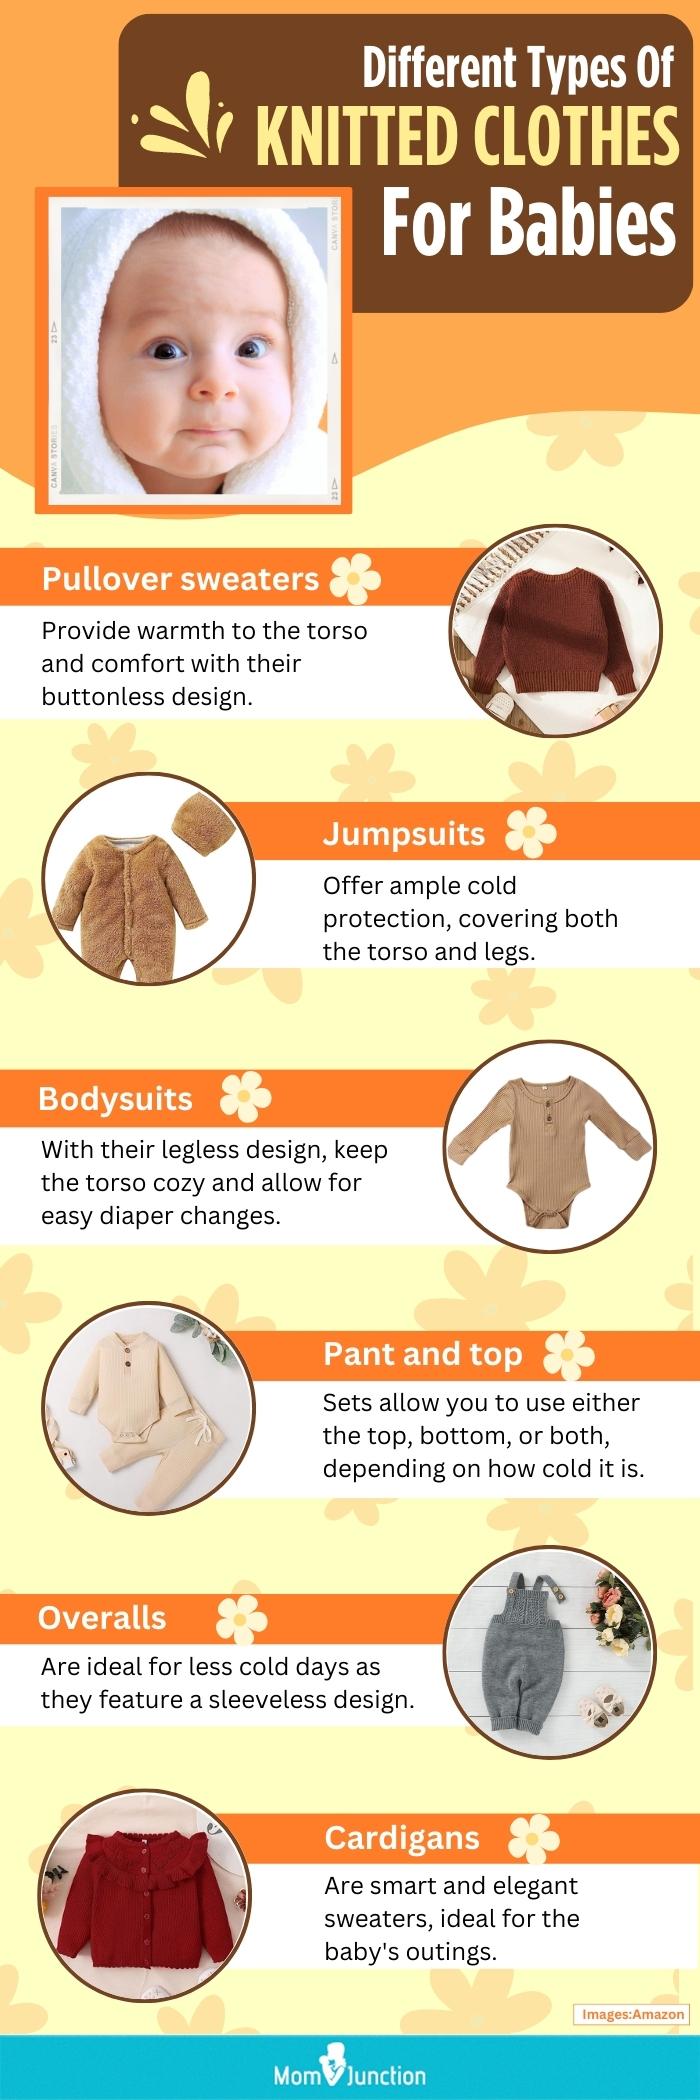 Different Types Of Knitted Clothes For Babies (infographic)